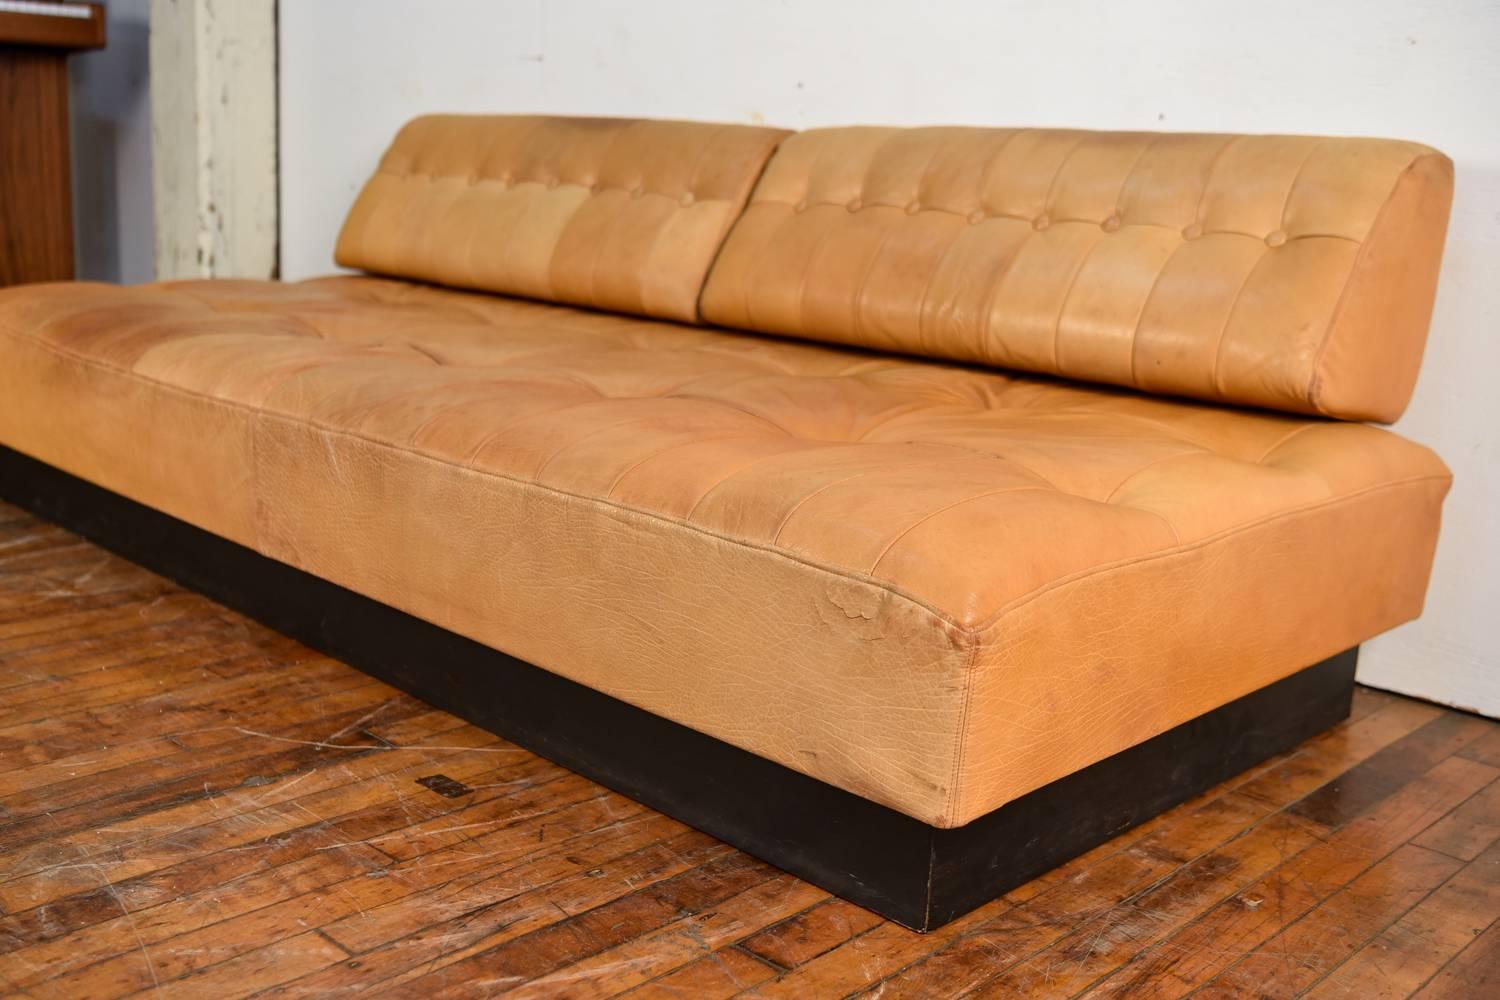 Late 20th Century Danish Midcentury De Sede Style Butterscotch Colored Leather Sofa or Daybed